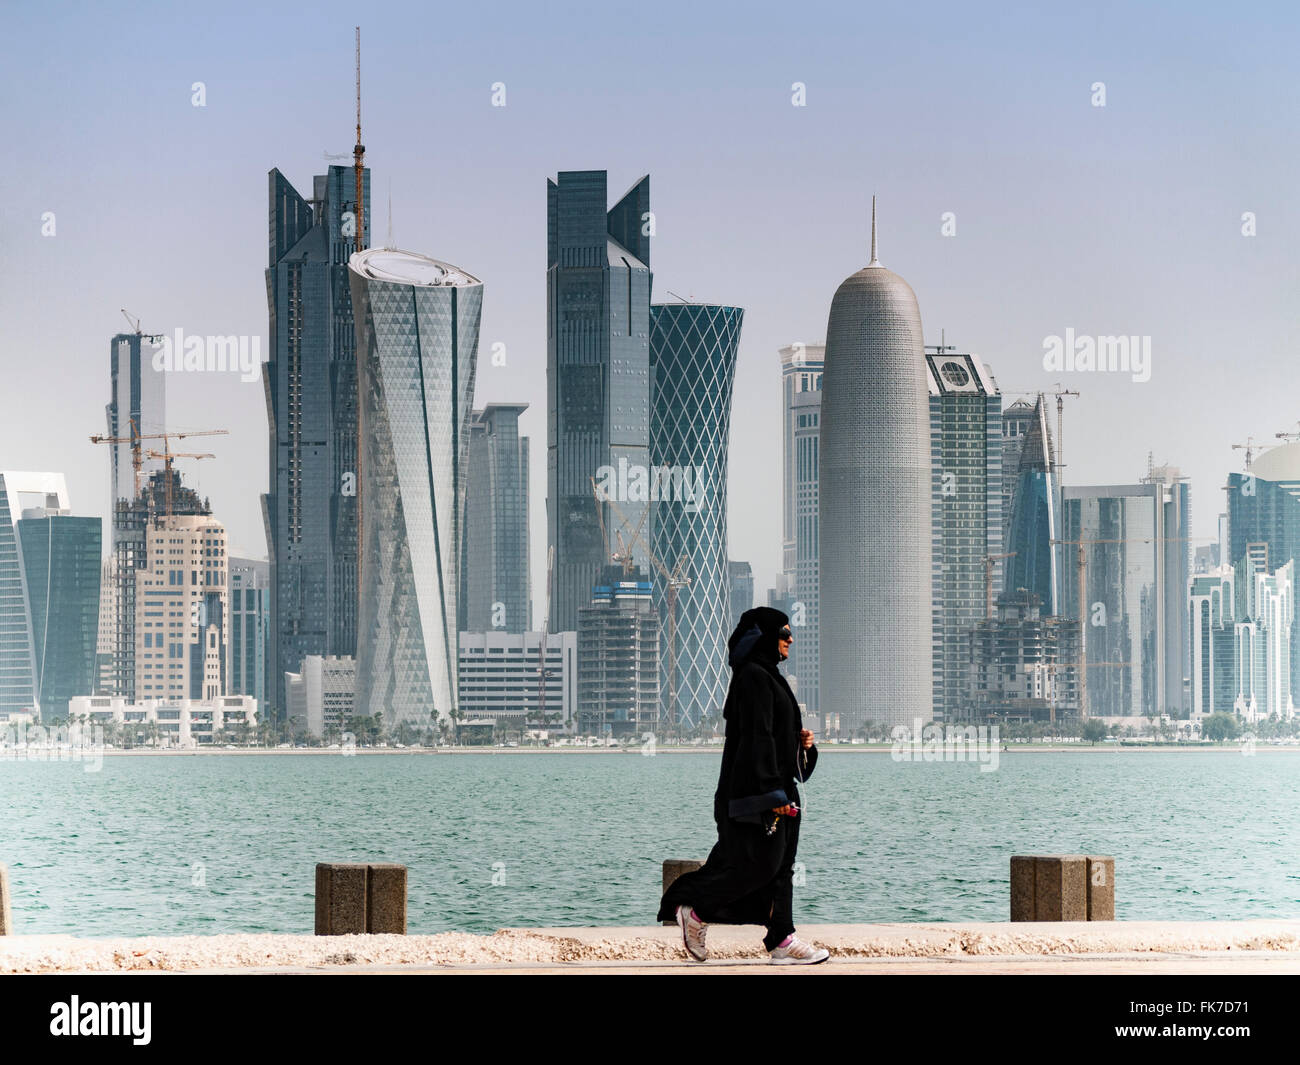 View along waterfront of Corniche towards modern office towers in Doha Qatar Stock Photo